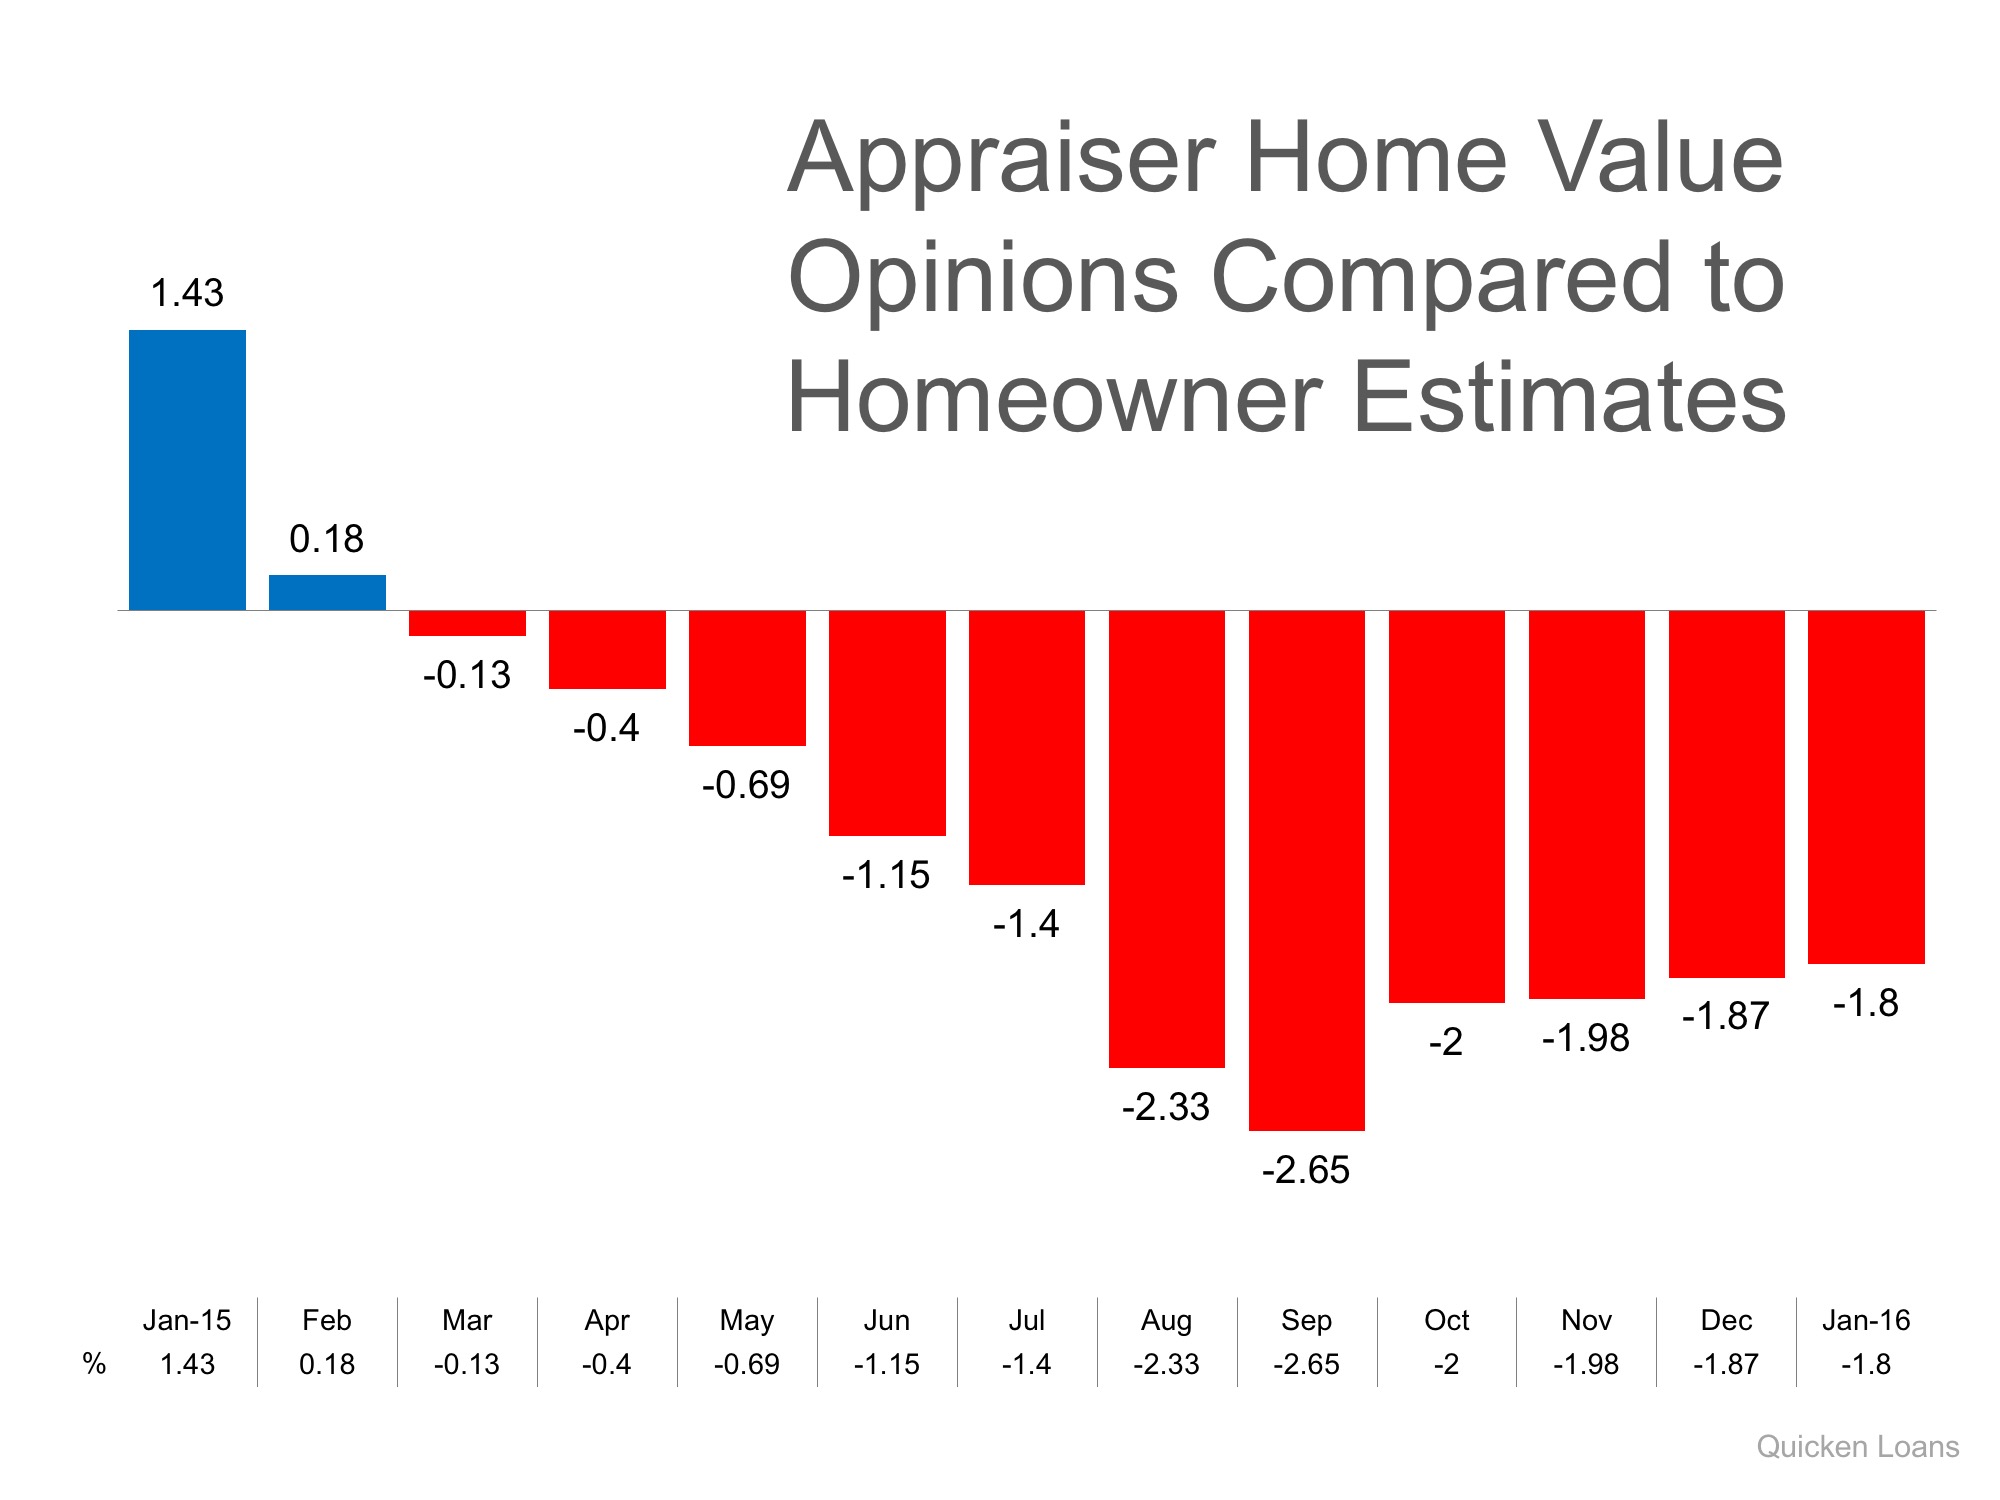 Appraiser Home Value Opinions vs. Homeowner Estimates | Simplifying The Market